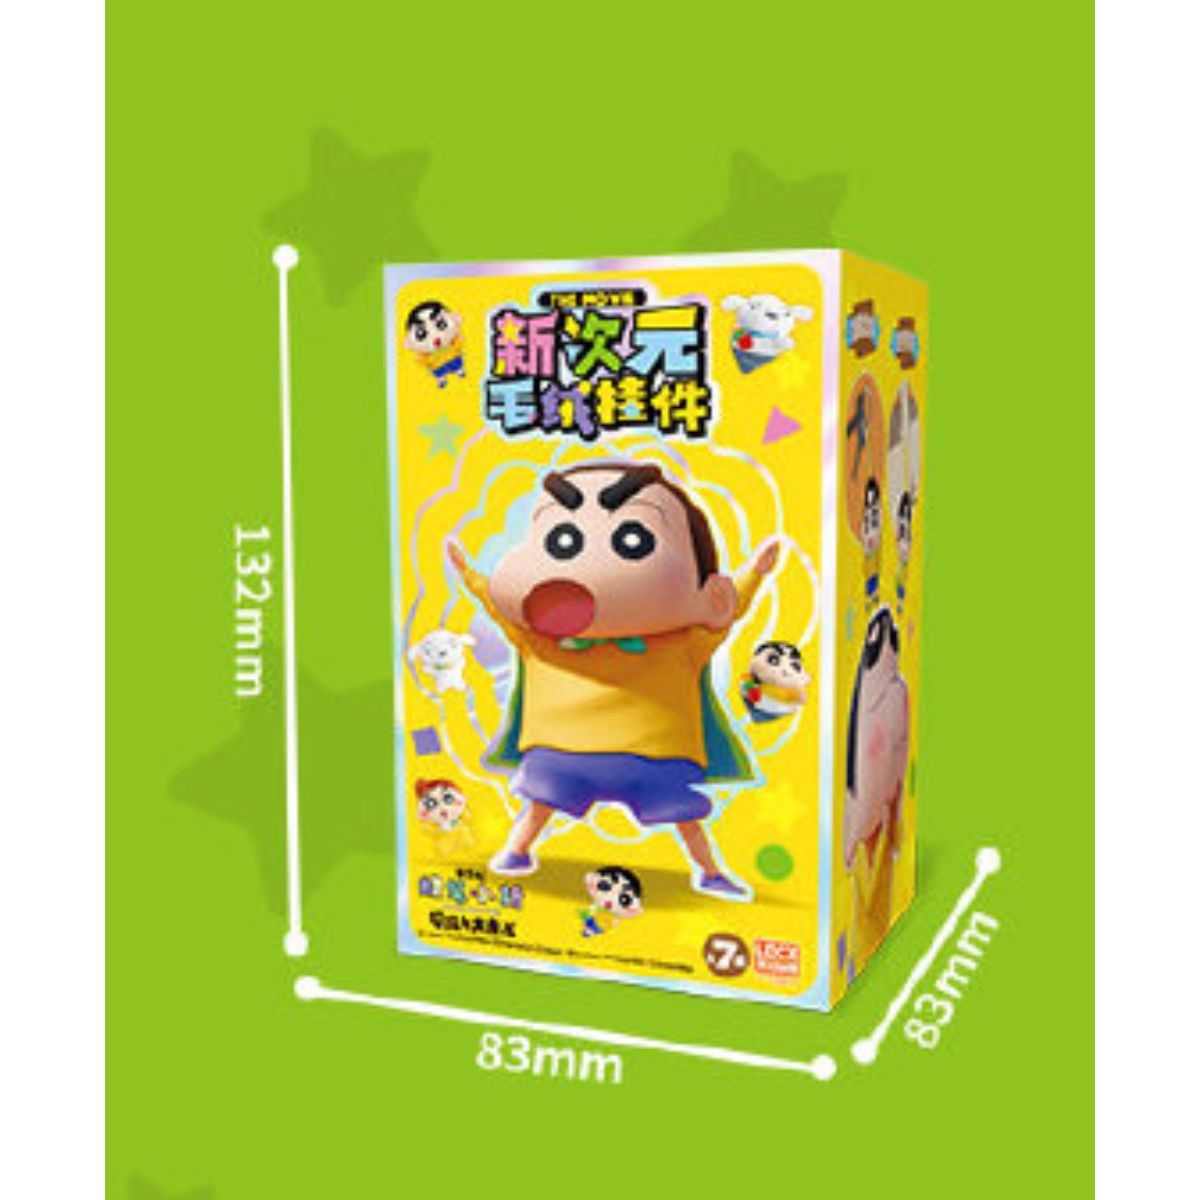 Crayon Shin Chan New Dimension Plush Series-Single Pack-LDCX LAB-Ace Cards &amp; Collectibles